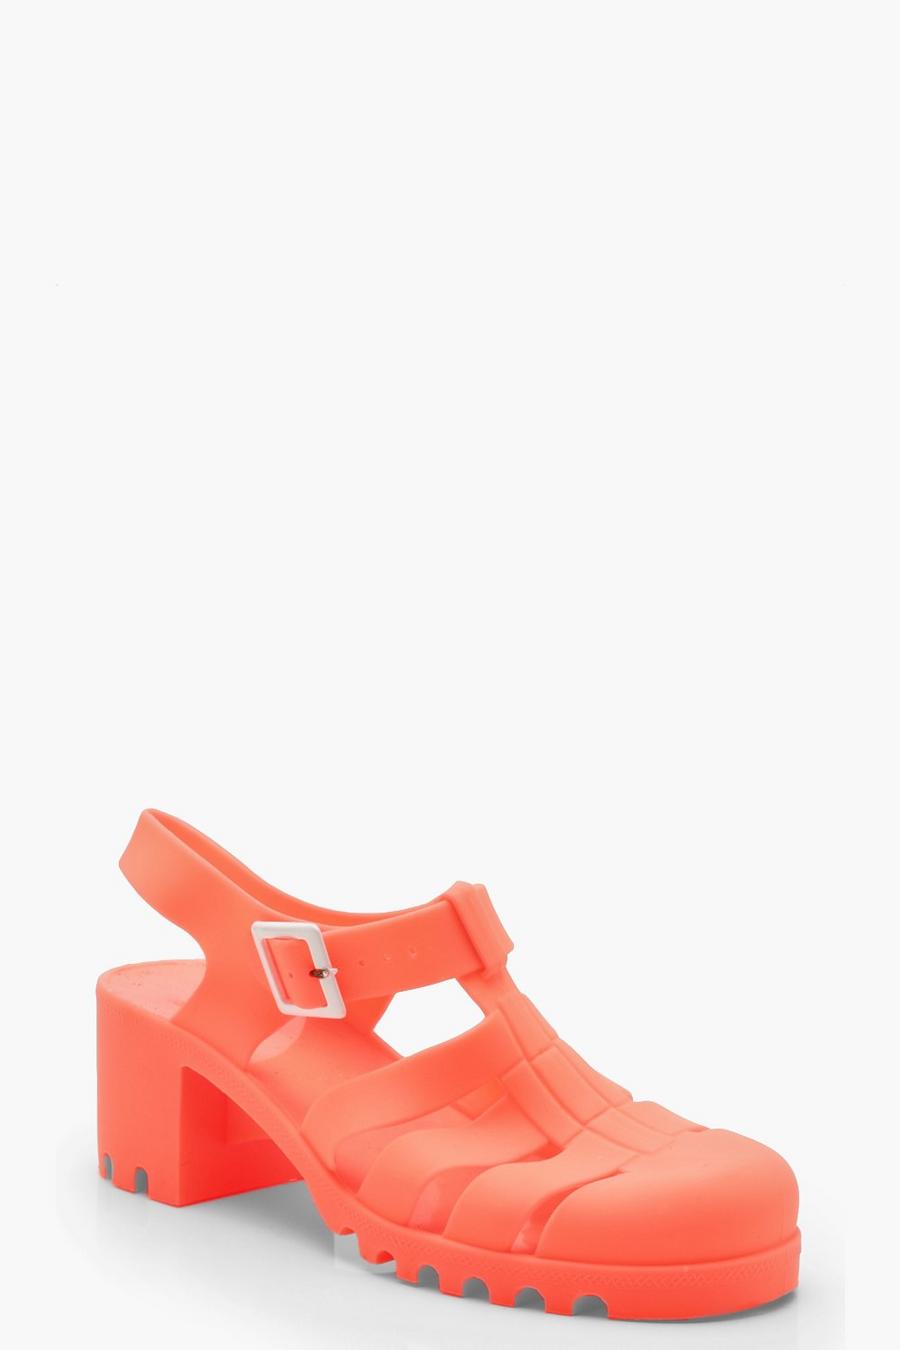 Coral Block Heel Jelly Shoes image number 1